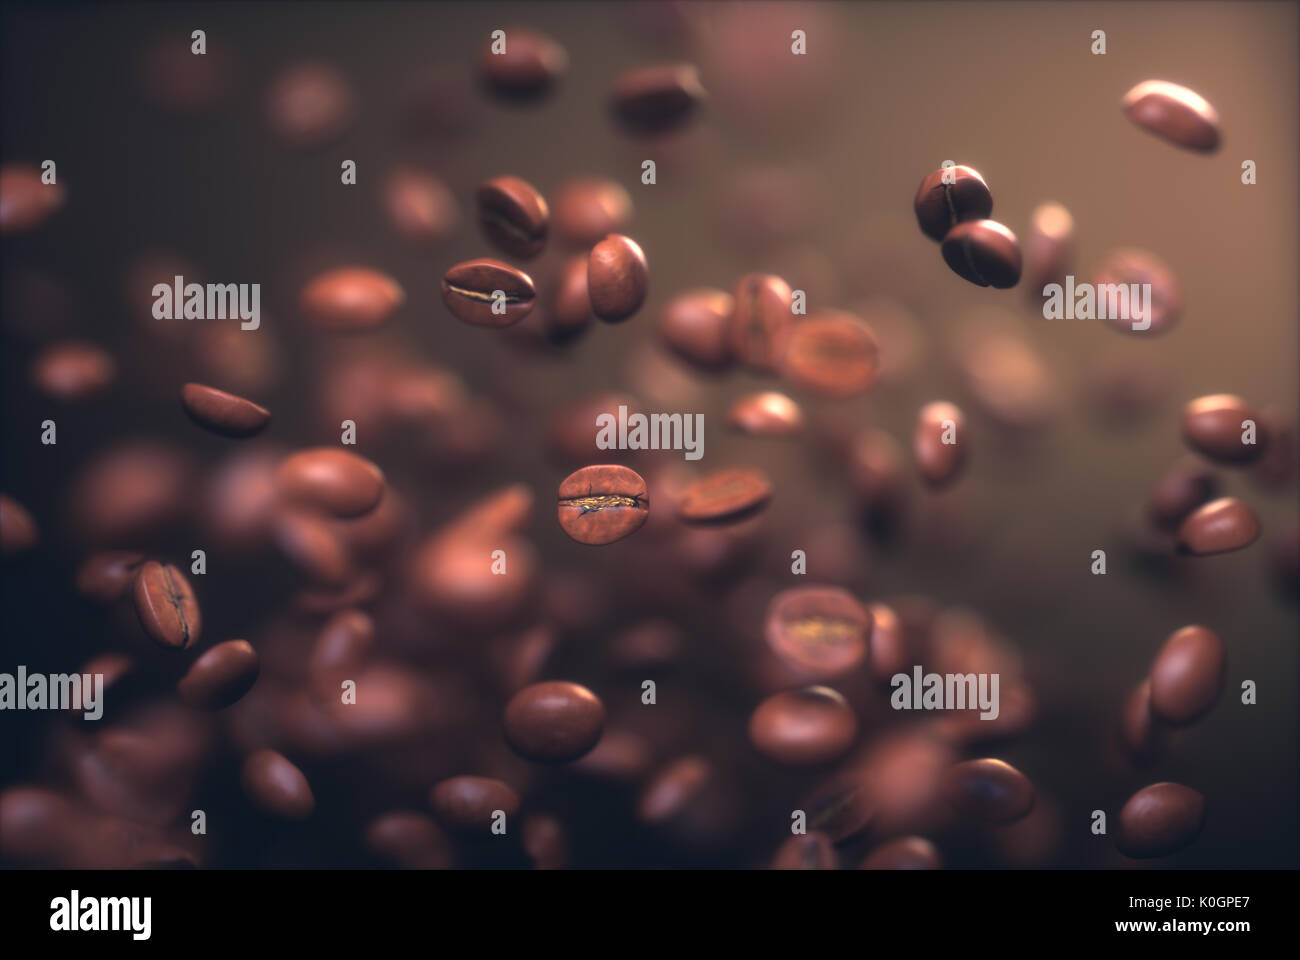 Roasted coffee beans, frozen grain in the air with shallow depth of field. Stock Photo